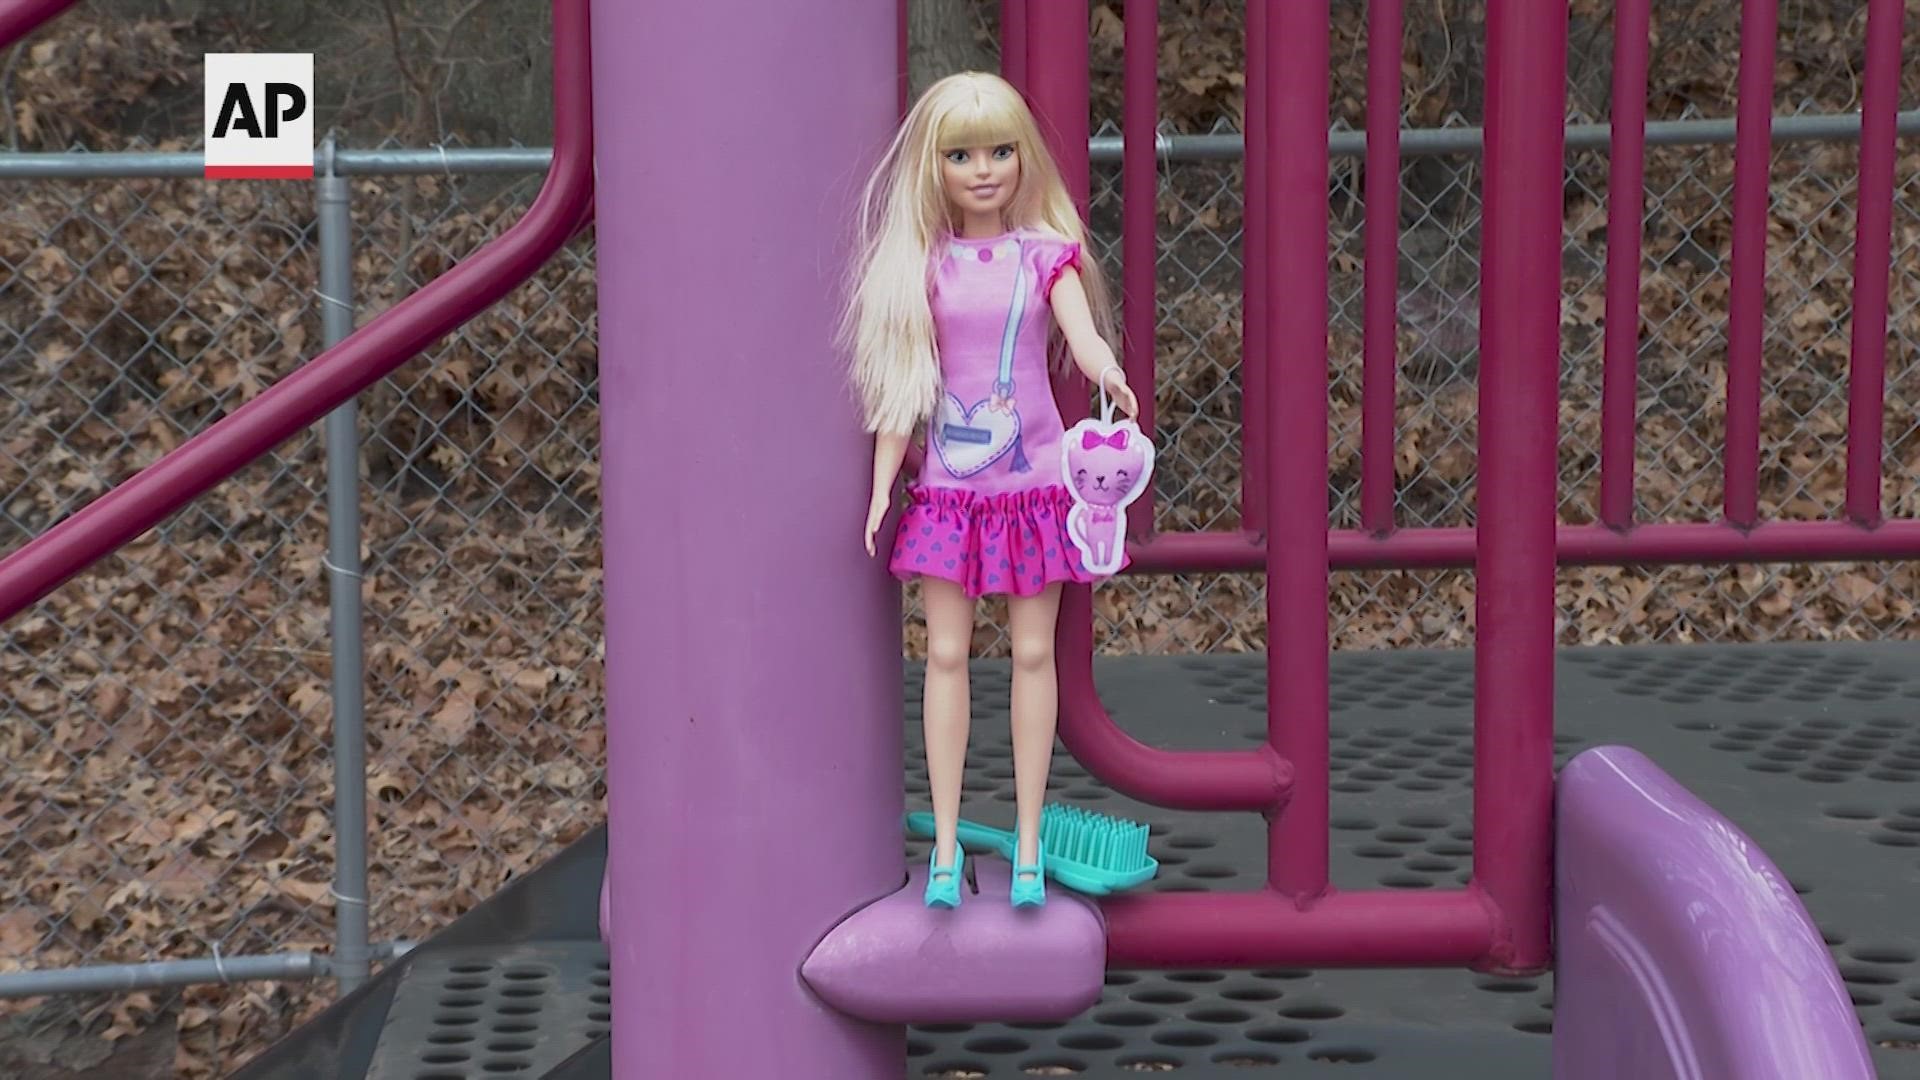 The new slightly softer-bodied Barbie follows on the high heels of tall, petite and curvy versions of the doll that were released five years ago.